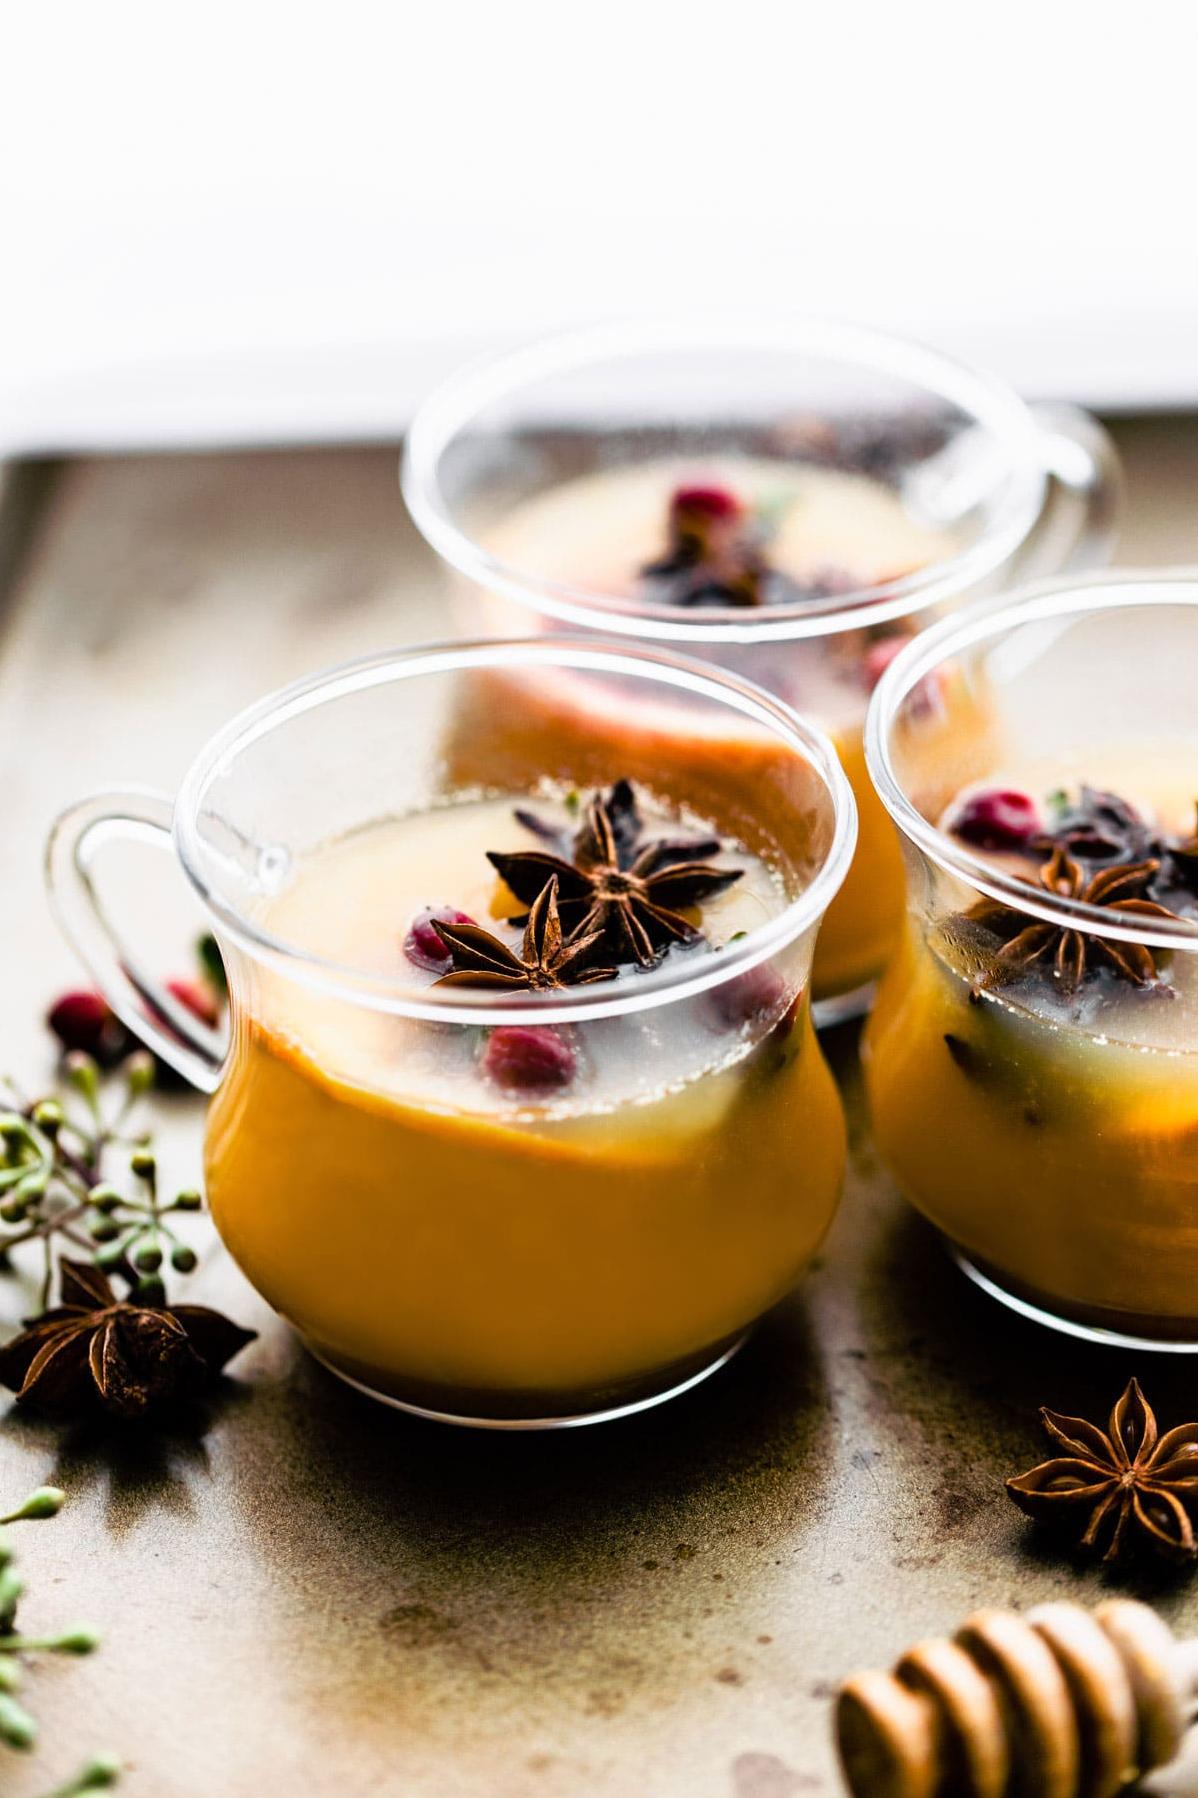  This hot cocktail is a fun twist on classic mulled wine.